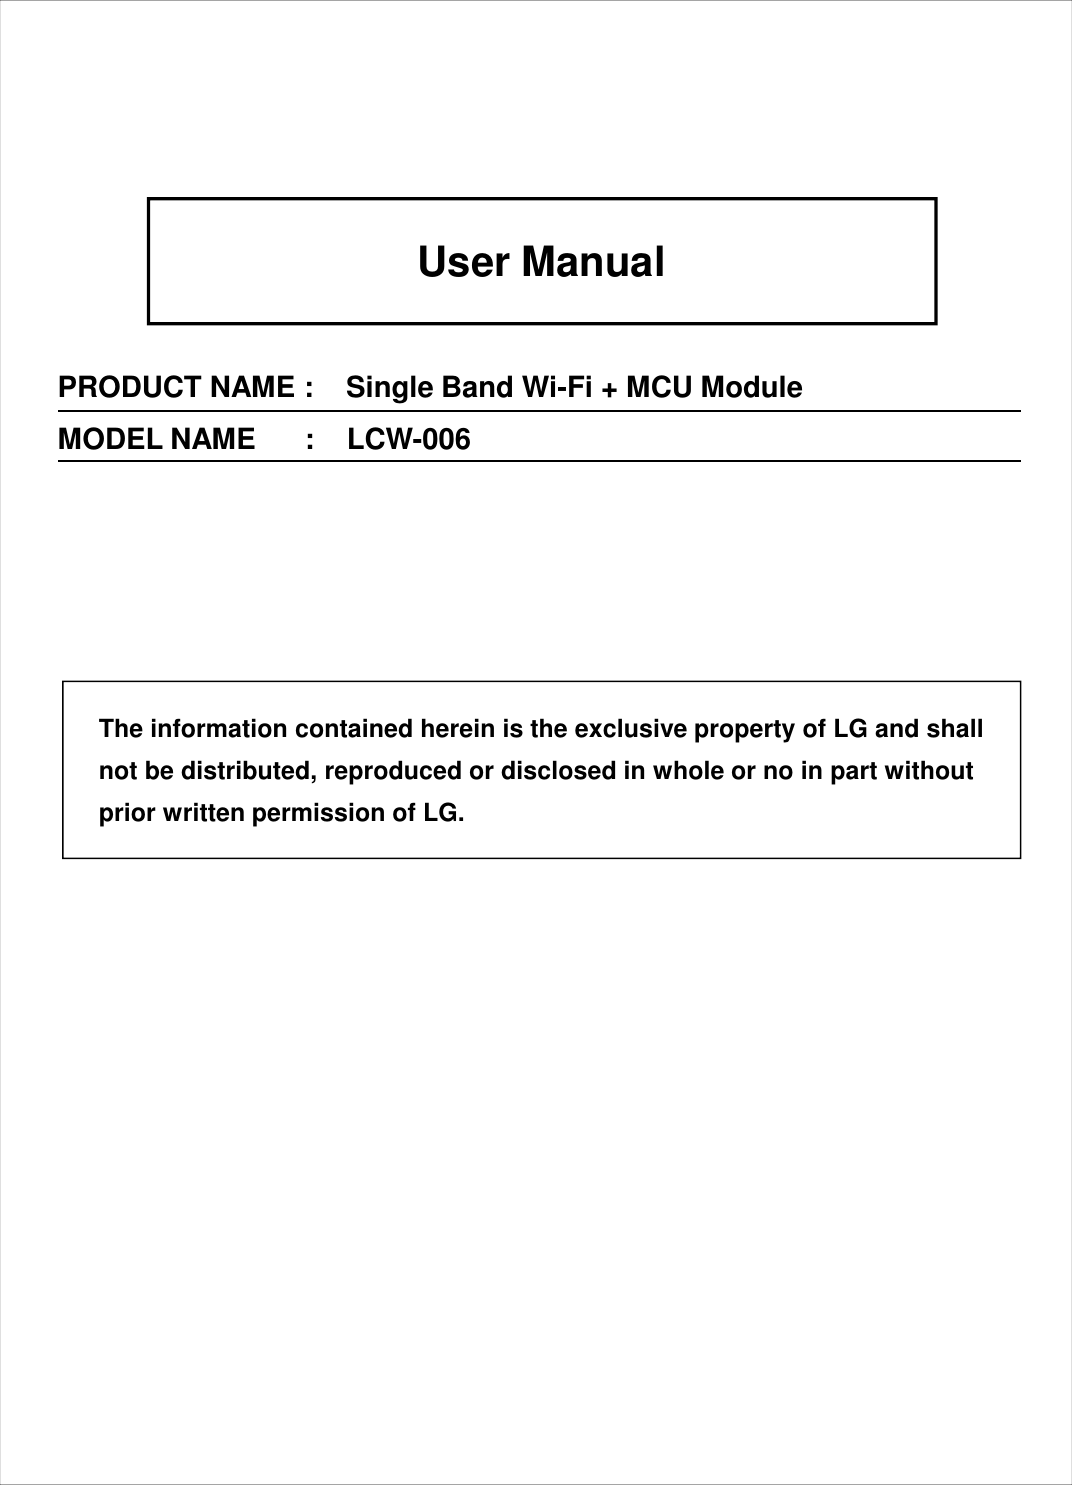 User ManualPRODUCT NAME :    Single Band Wi-Fi + MCU ModuleMODEL NAME      :    LCW-006The information contained herein is the exclusive property of LG and shallnot be distributed, reproduced or disclosed in whole or no in part withoutprior written permission of LG.